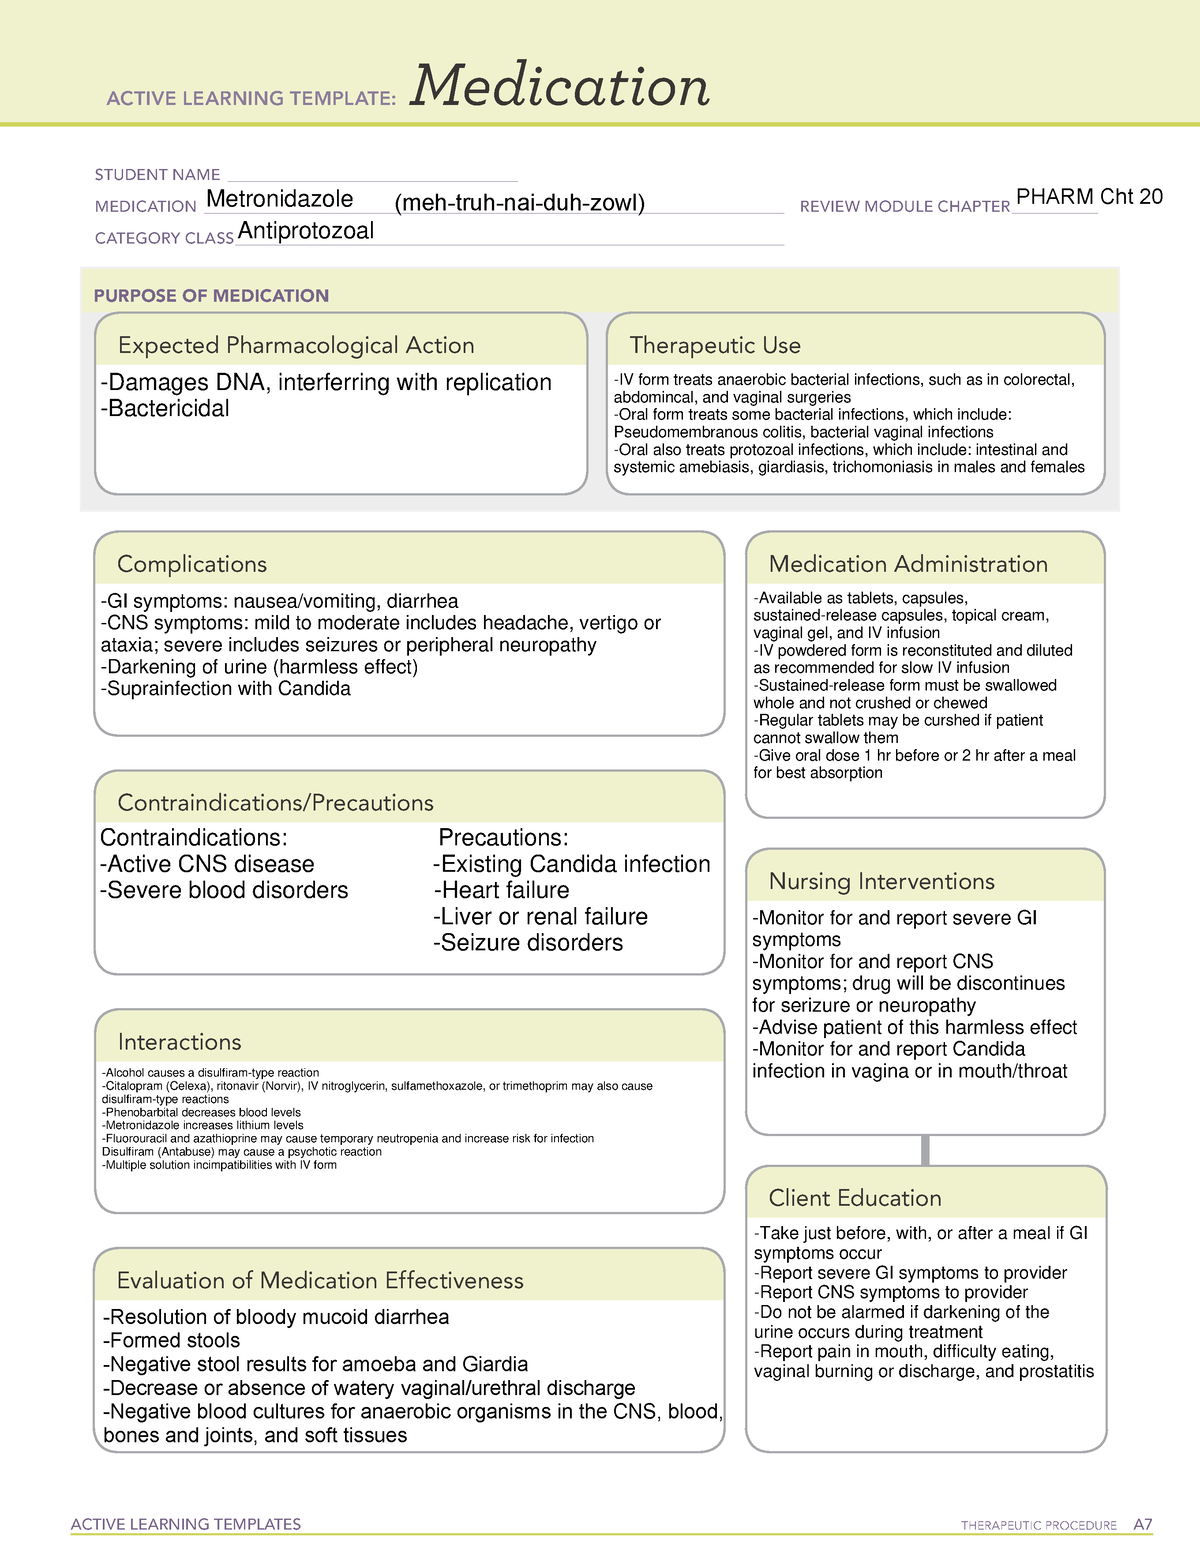 Week 2 Metronidazole drug template ACTIVE LEARNING TEMPLATES